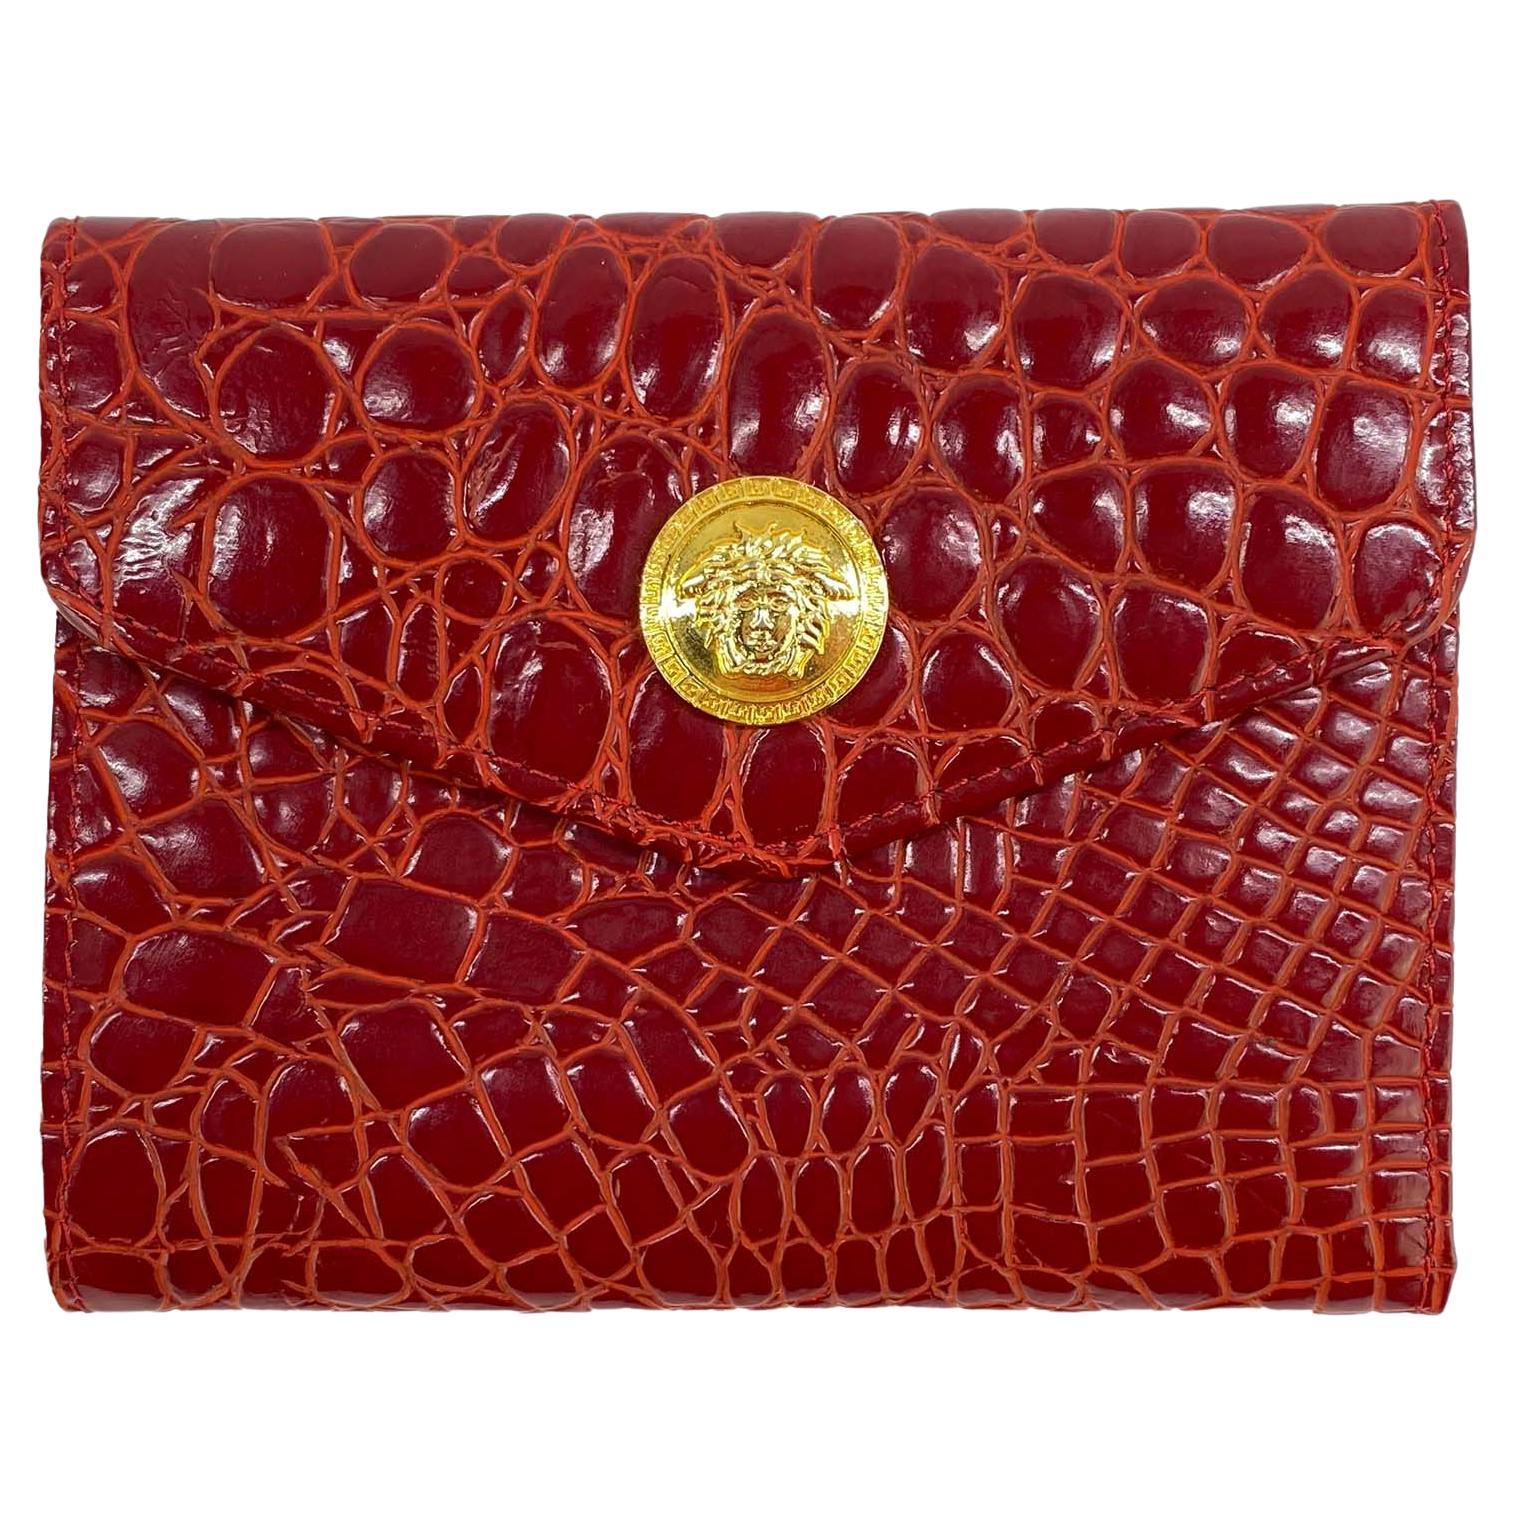 1990s Gianni Versace Red Crocodile Wallet New Old Stock